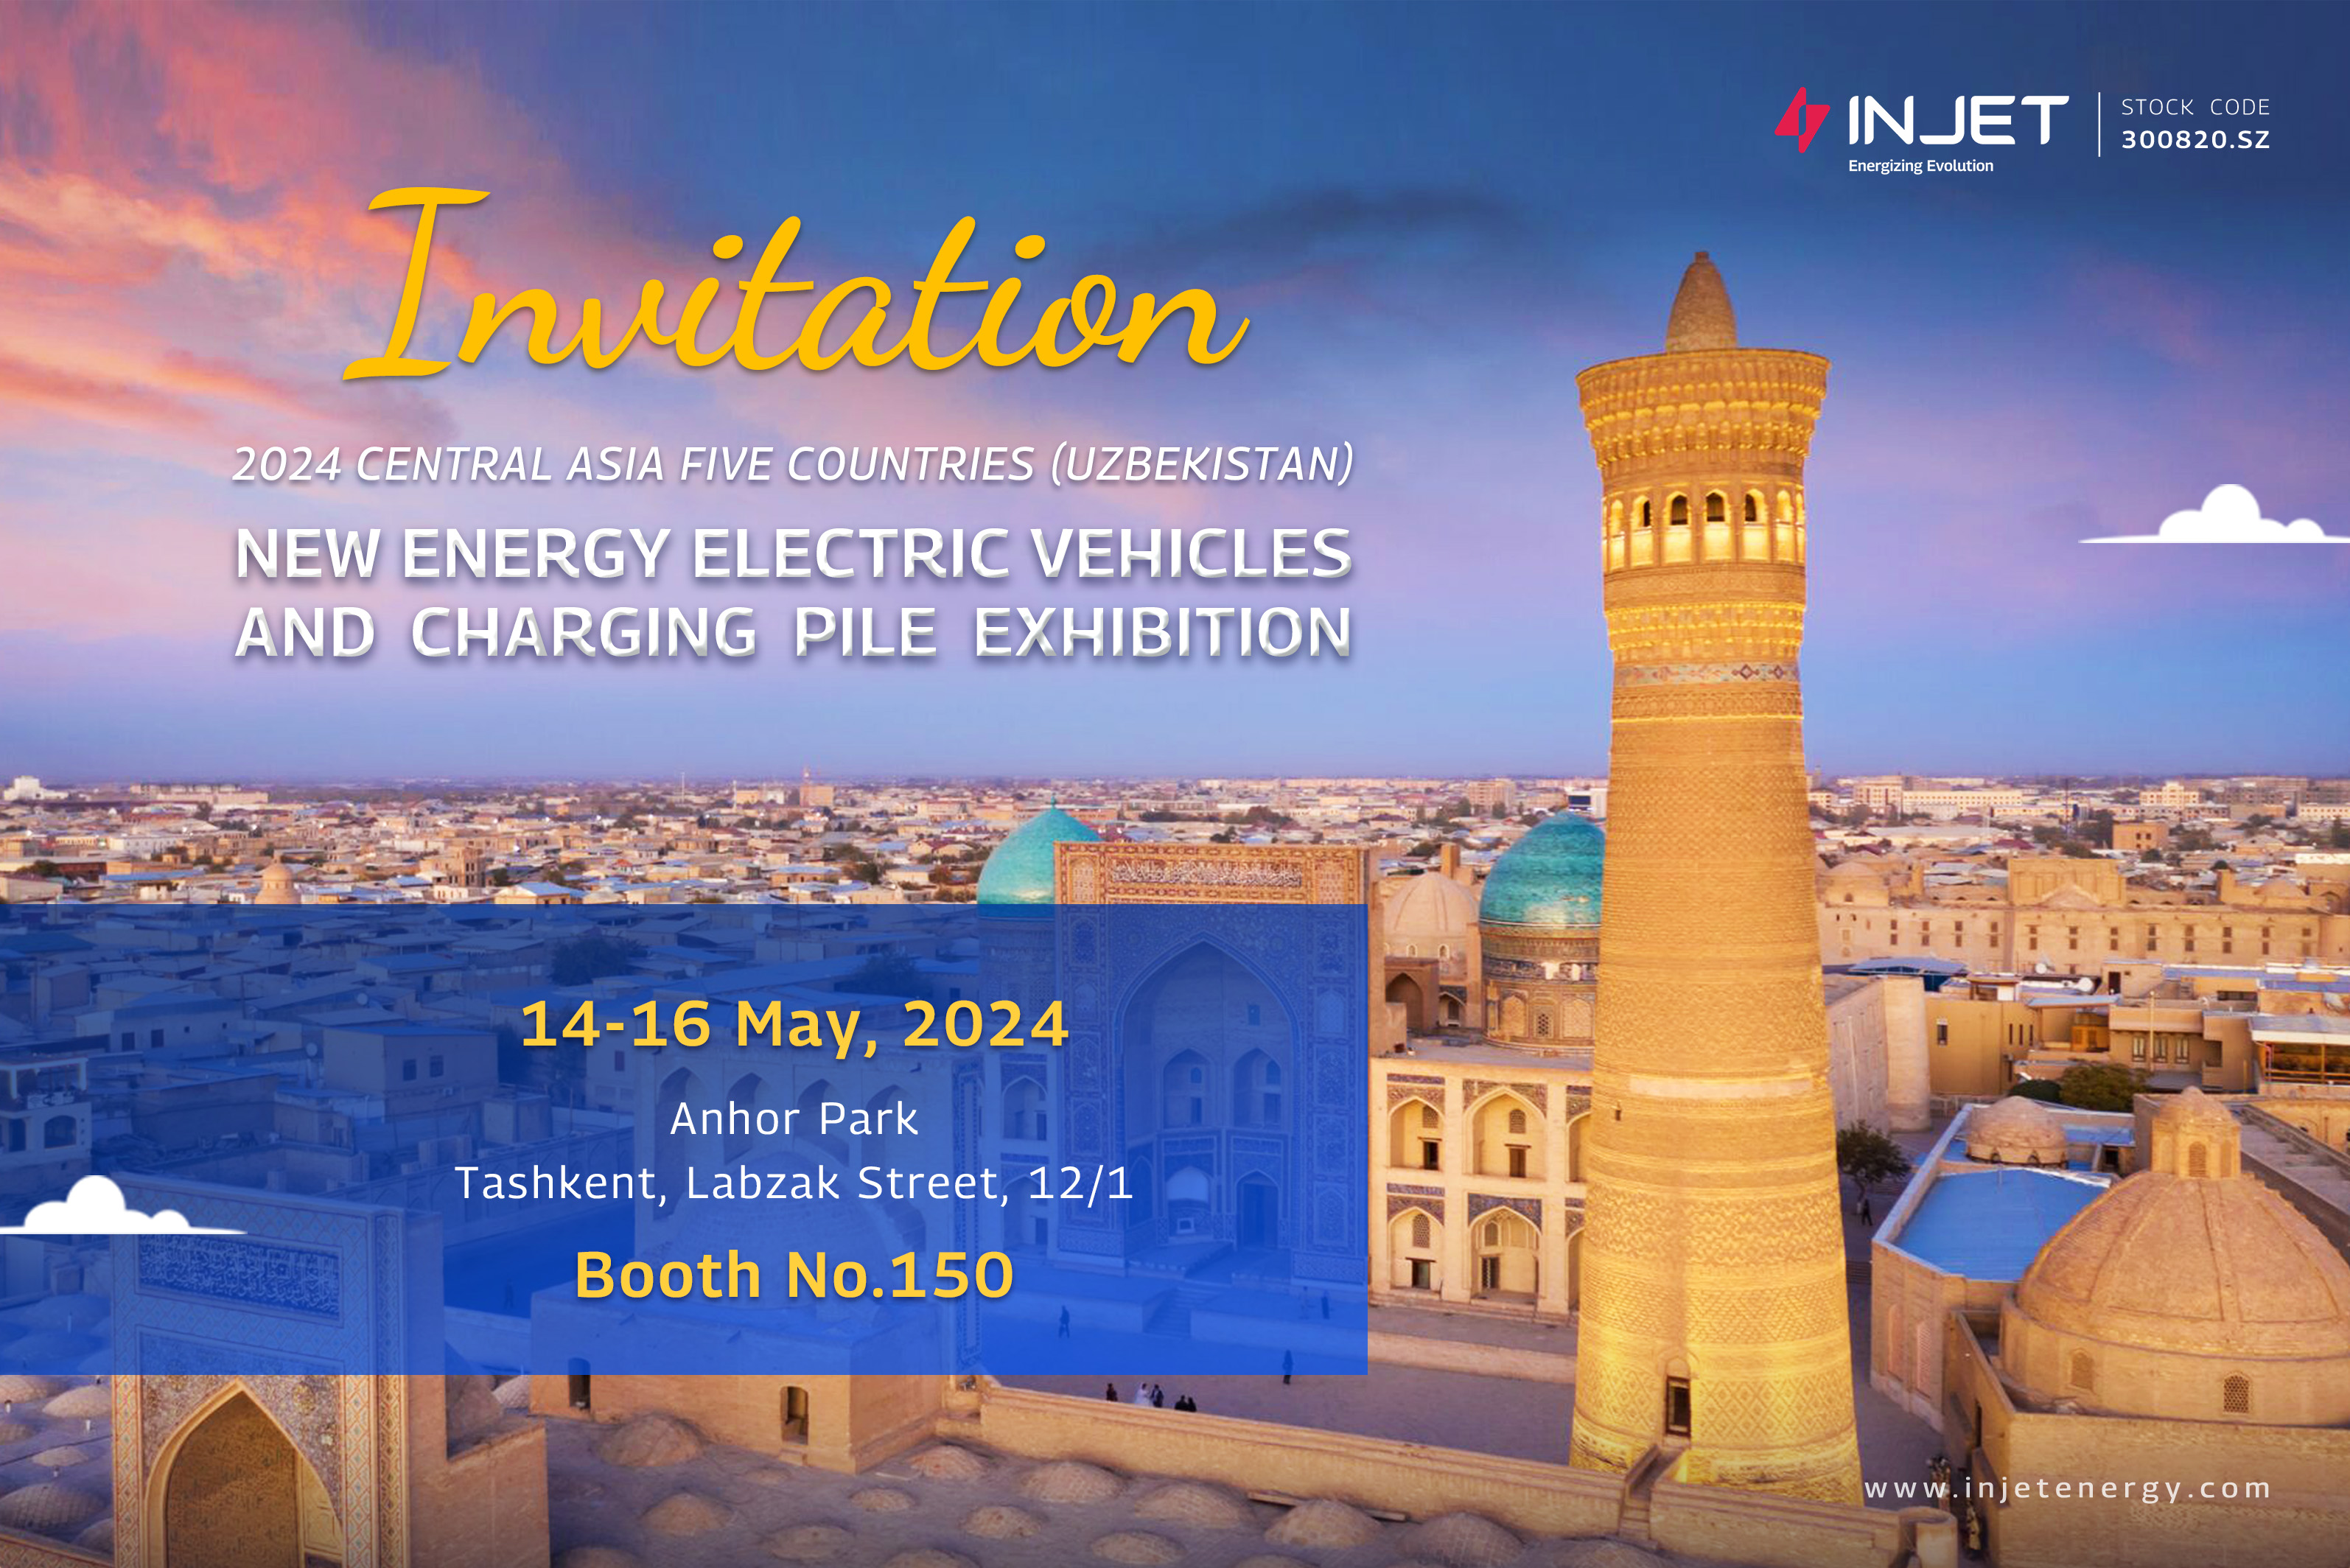 Invitation to Central Asia New Energy Vehicle Charging Expo